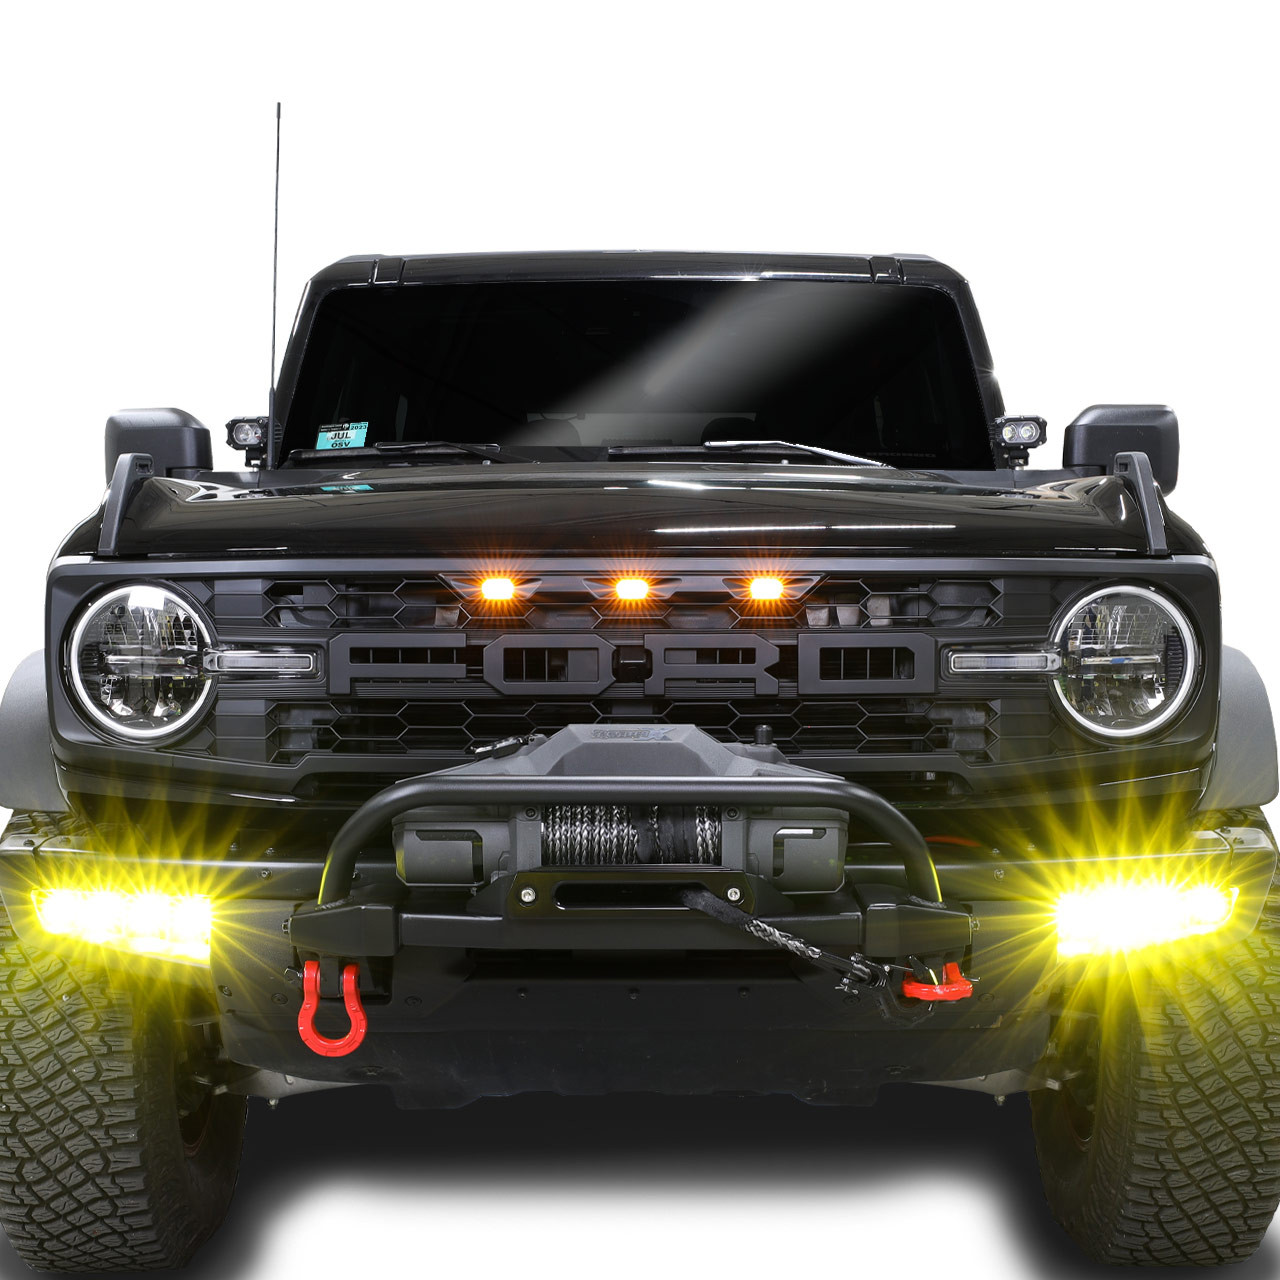 IAG I-Line 4 Lamp Fog Light Kit with Wireless Remote Control for 2021+ Ford Bronco - Lighted 1